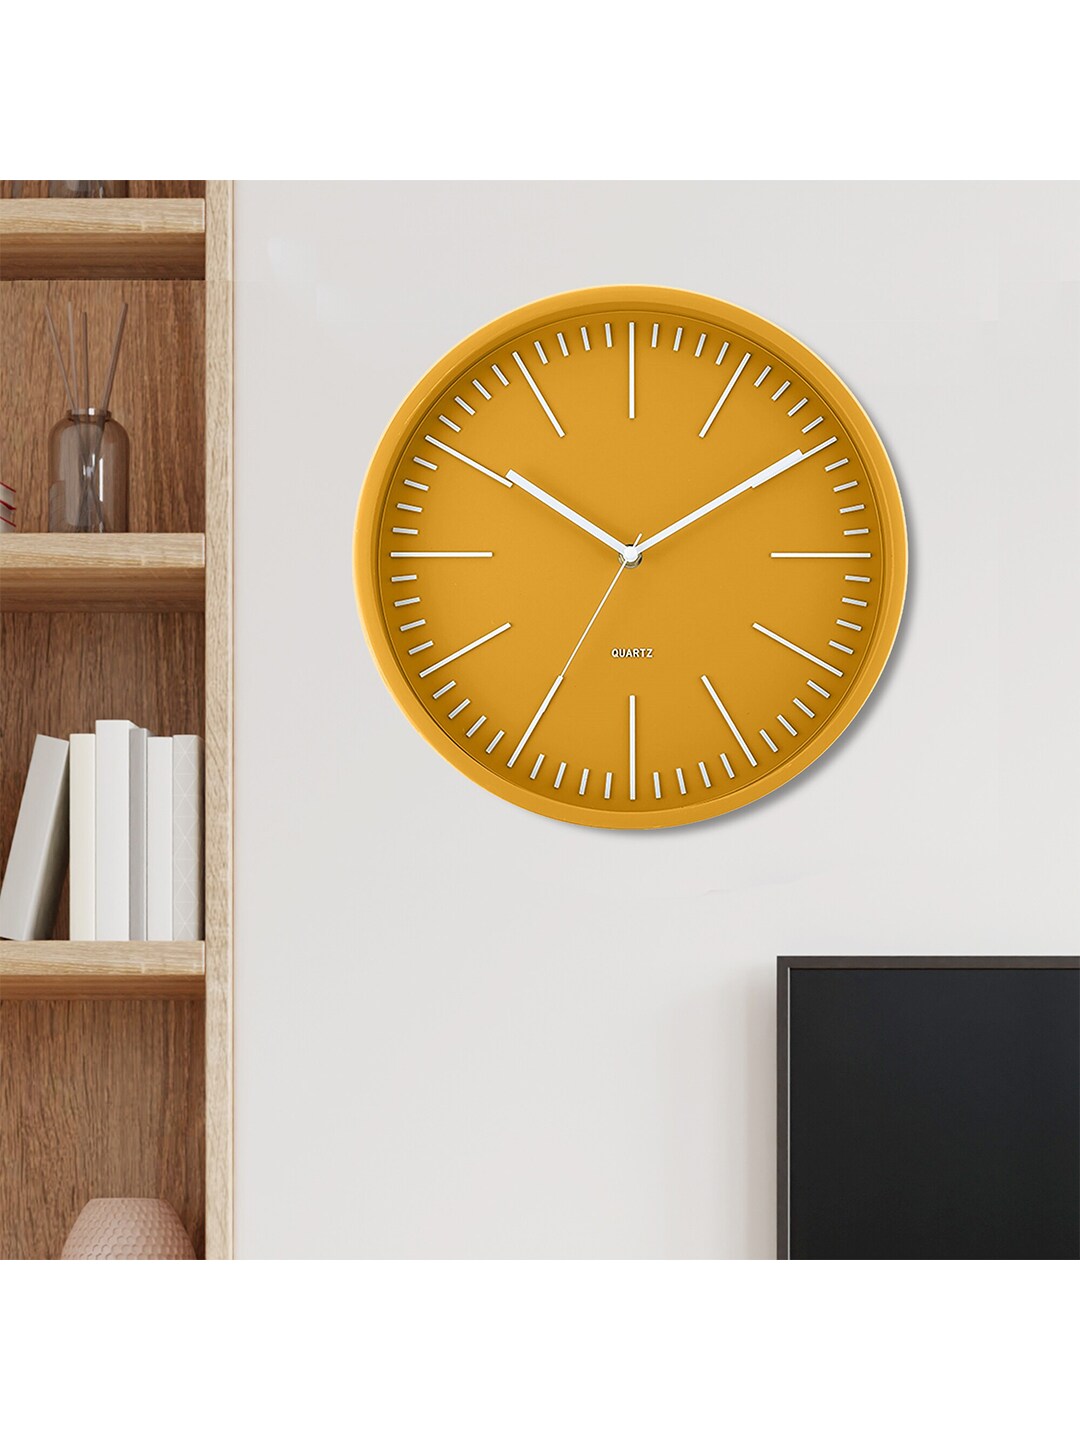 HomeTown Mustard & White Contemporary Analogue Wall Clock Price in India